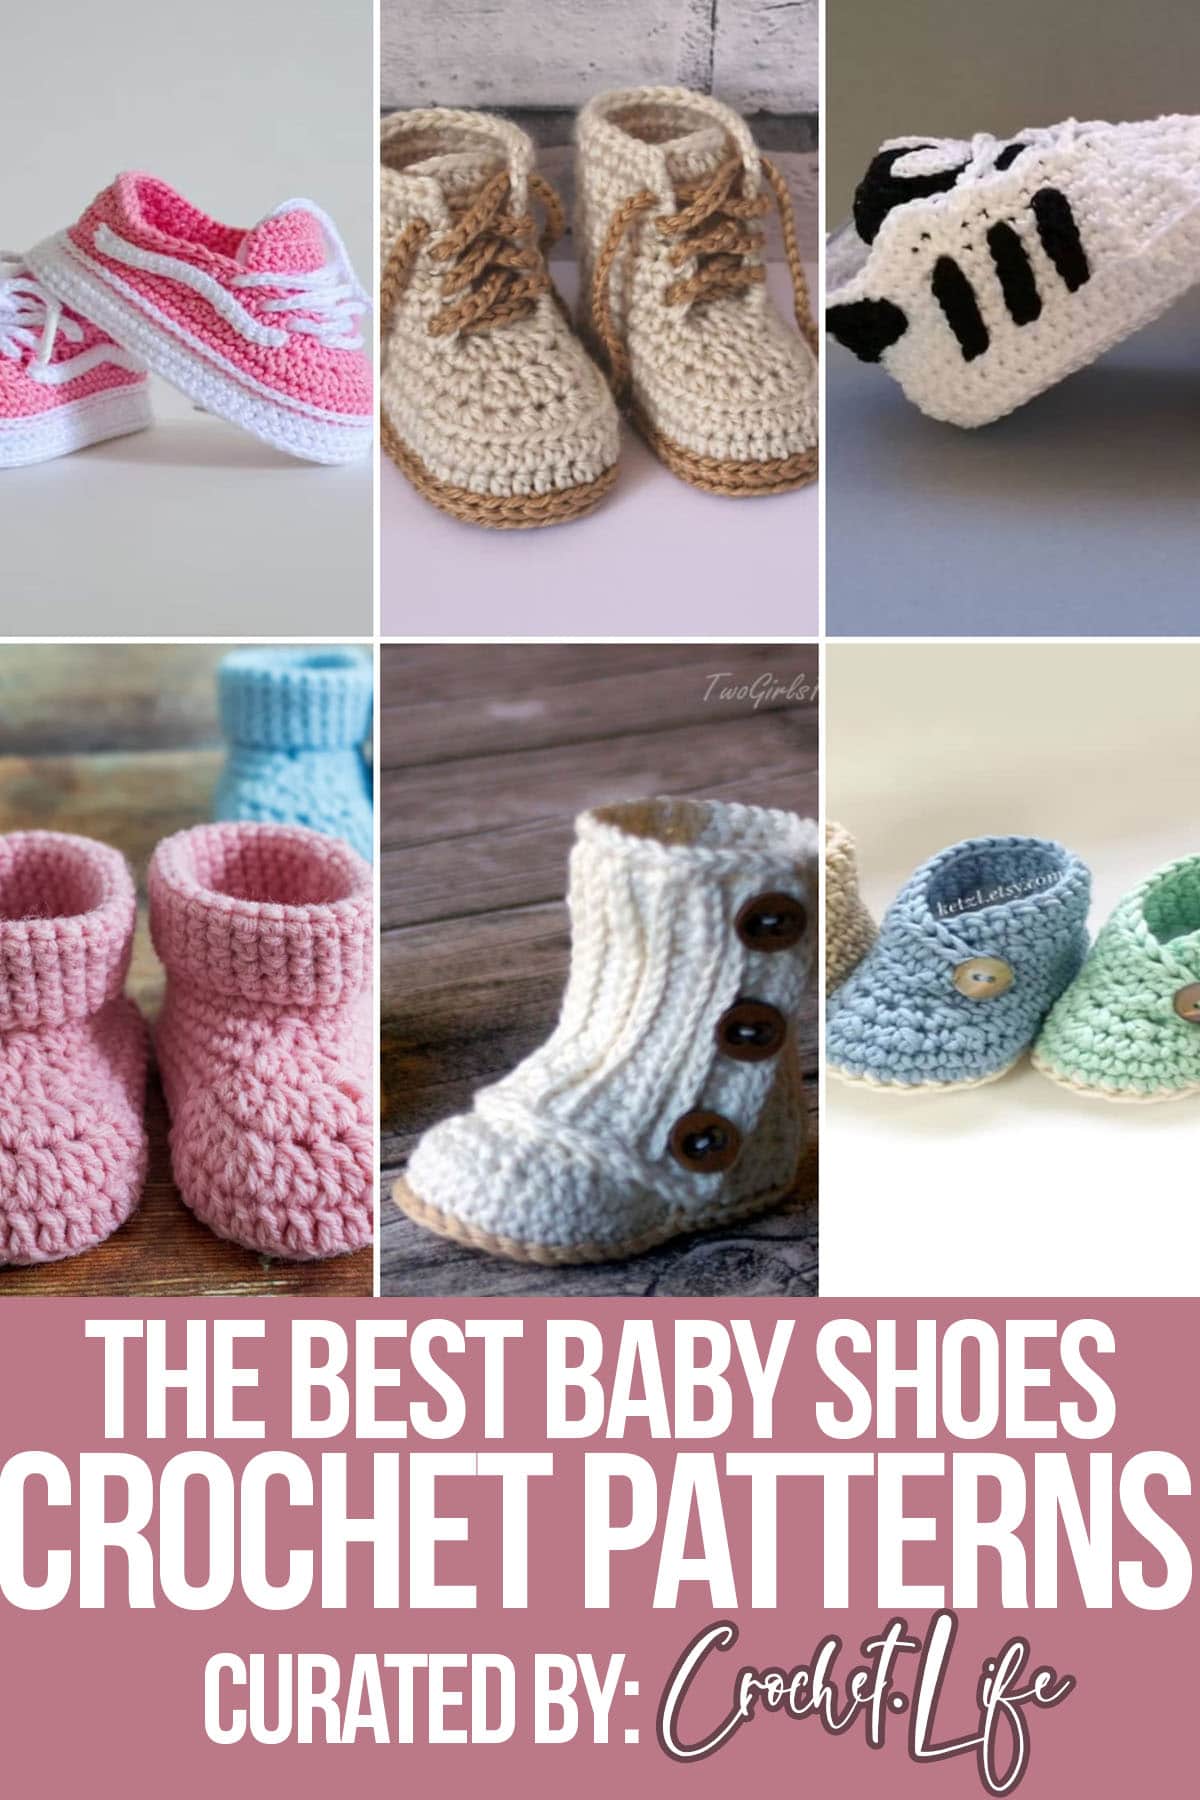 photo collage of crochet patterns for baby shoes with text which reads the best baby shoes crochet patterns curated by crochet.life